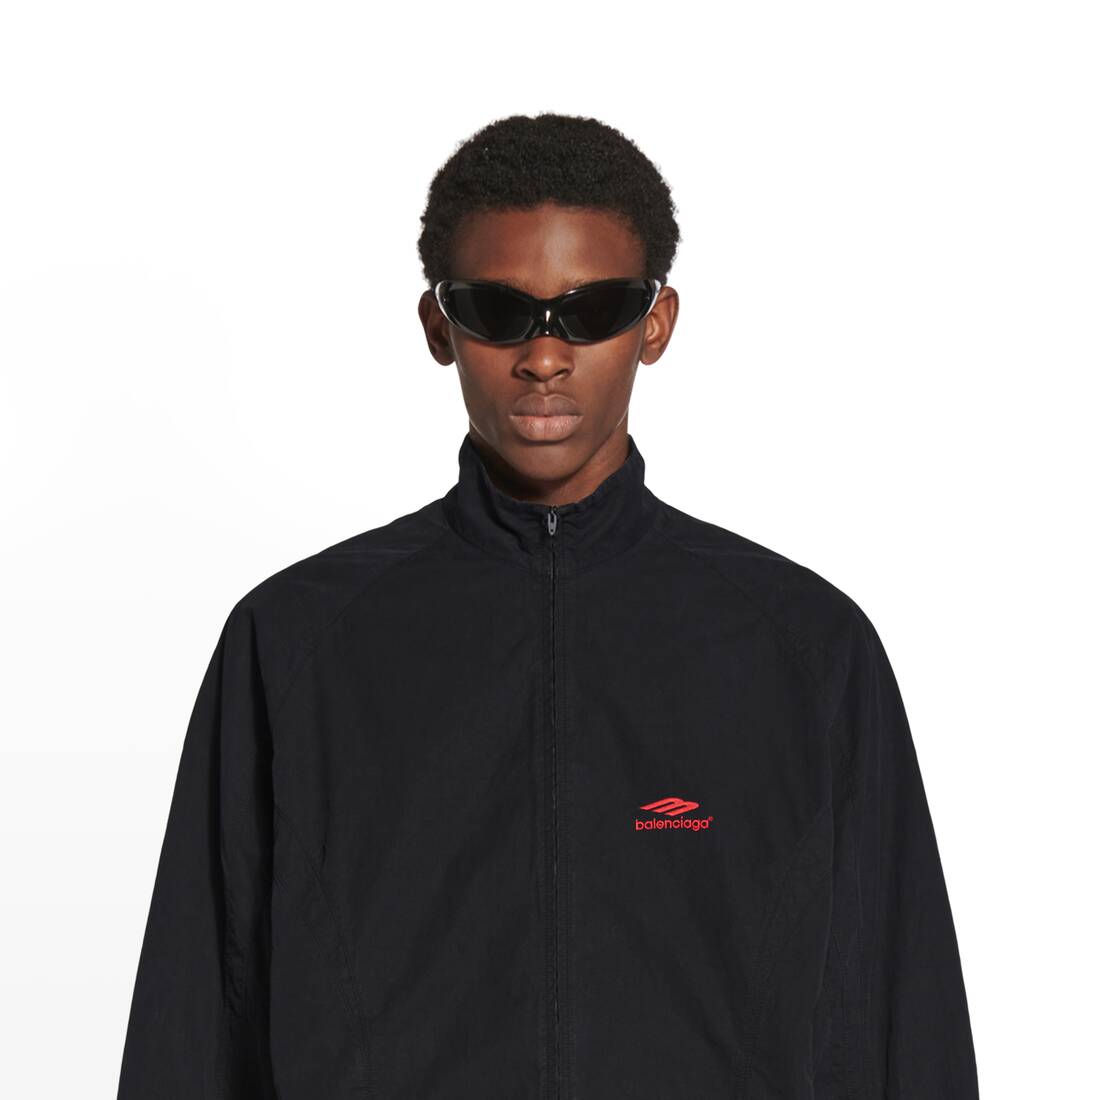 3b Sports Icon Tracksuit Shirt in Black